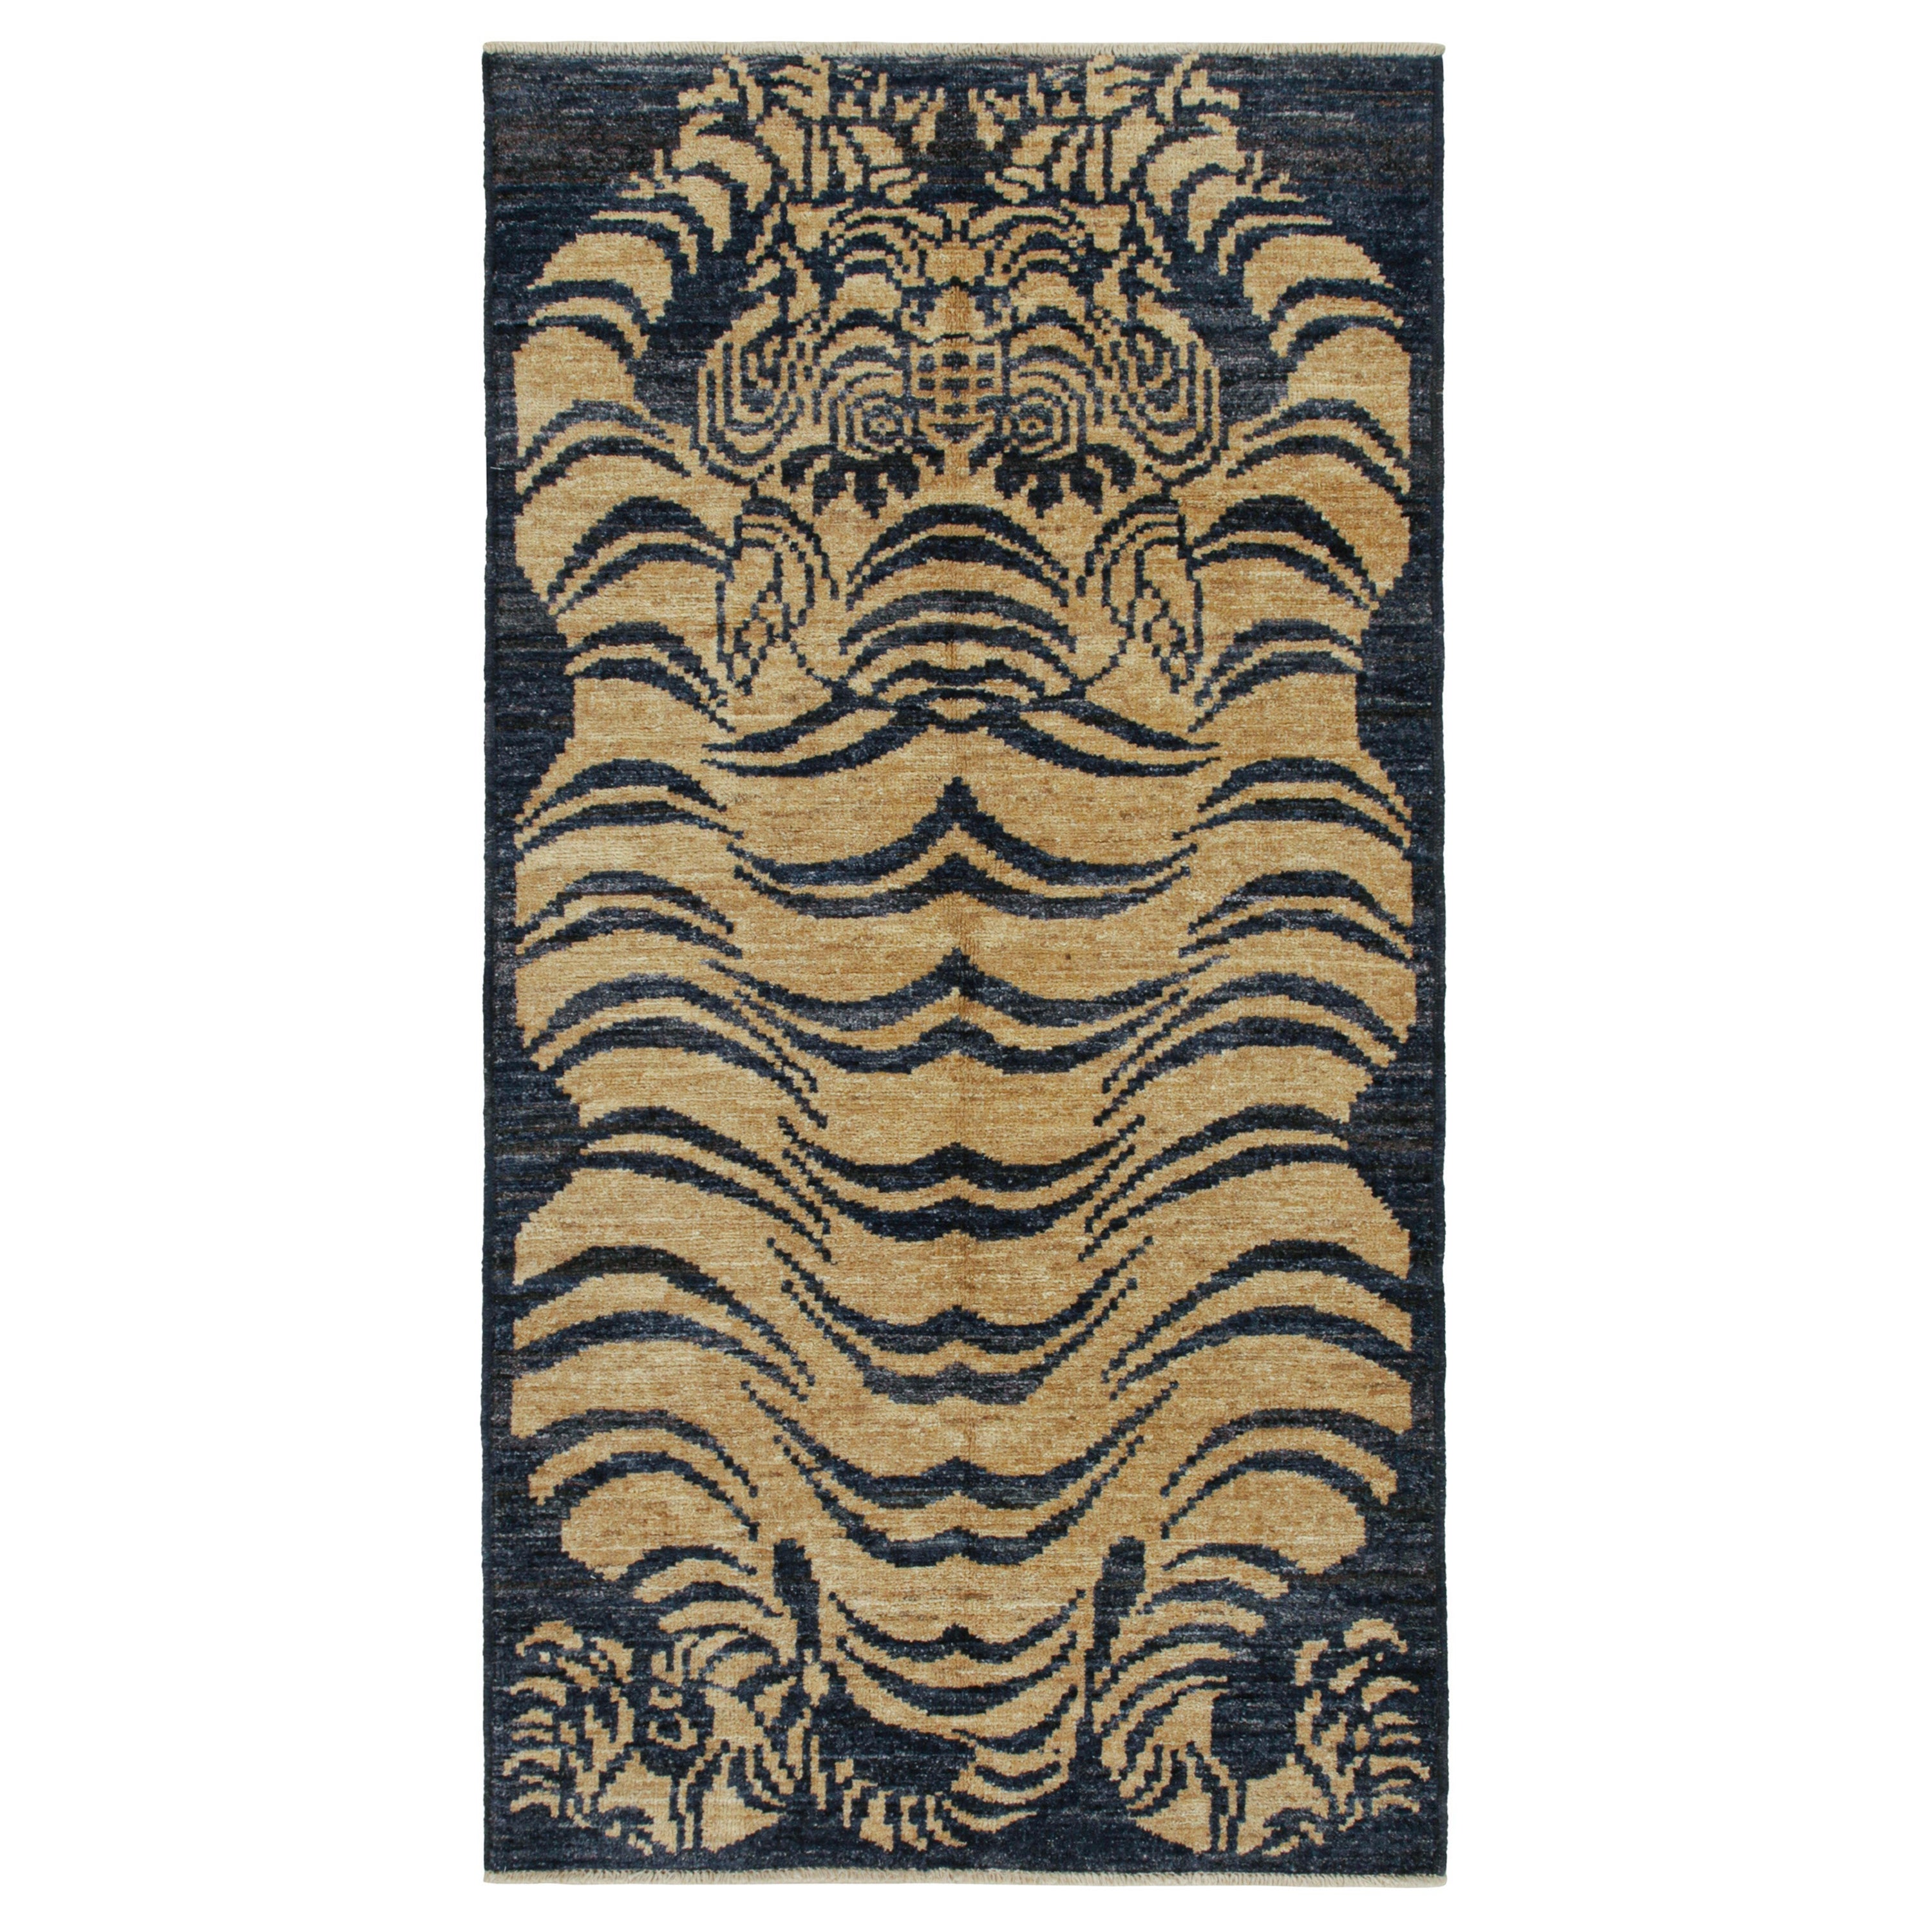 Tapis & Kilim's Classic-Style Tiger-Skin Custom Runner with Blue & Gold Pictorial (en anglais) en vente